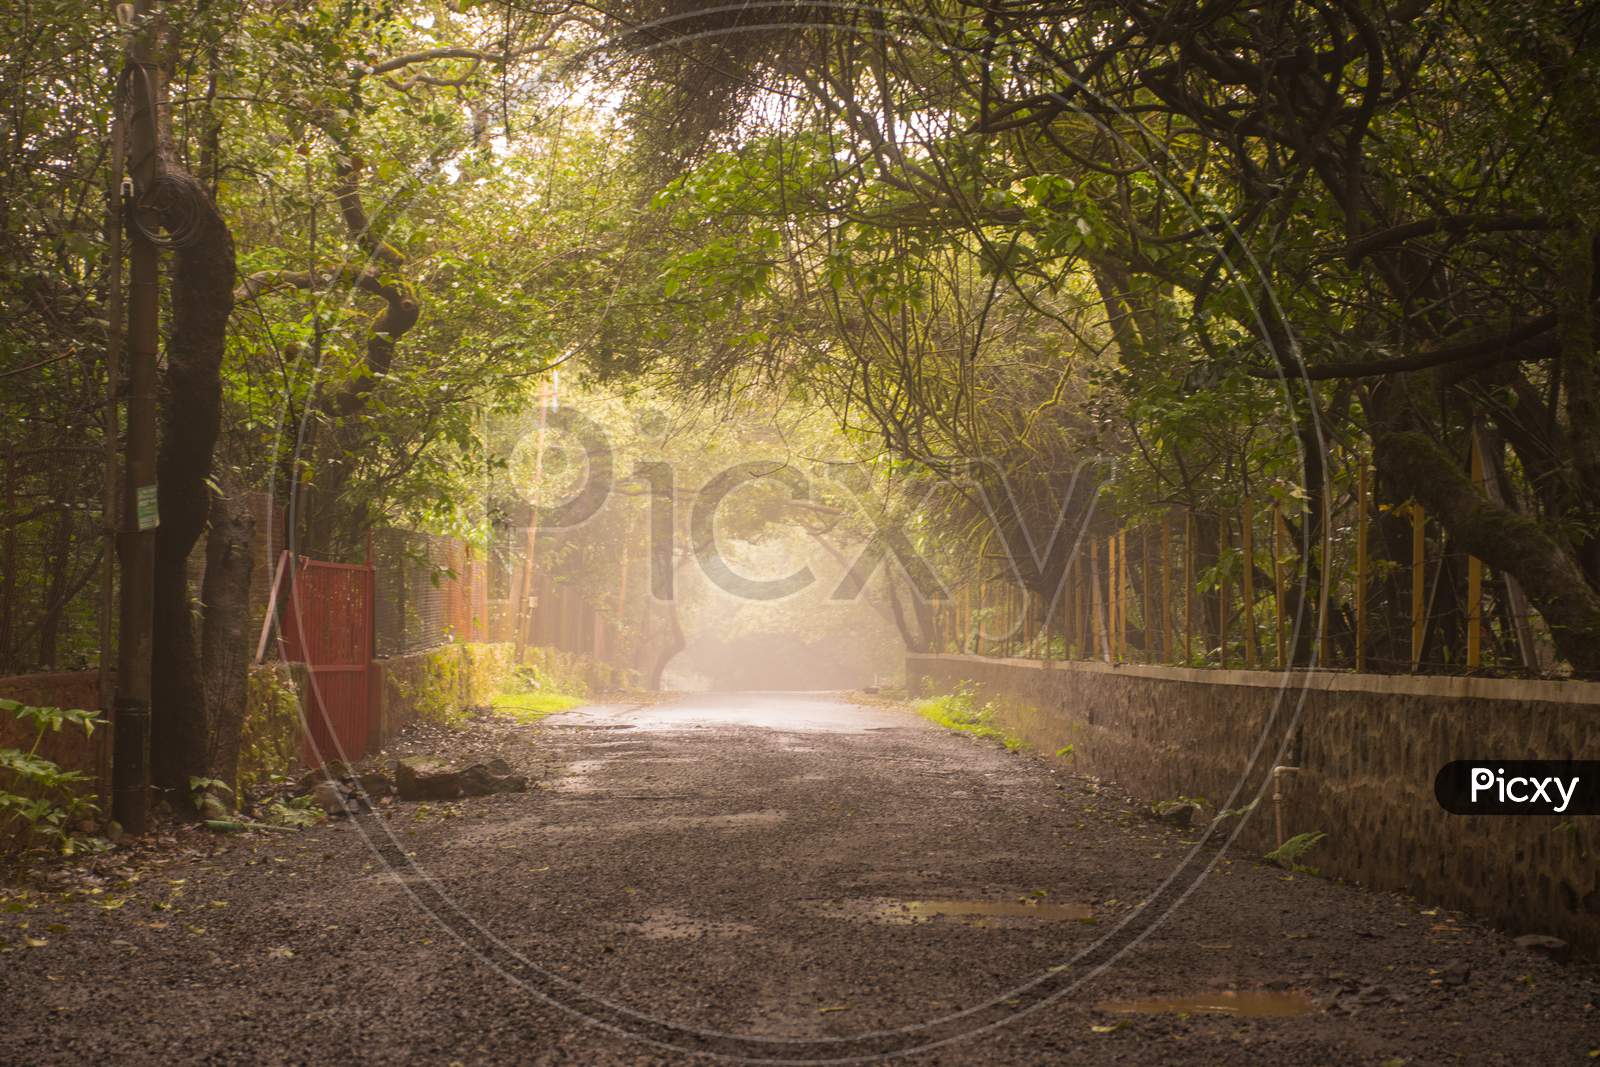 A Beautiful Foggy Road With Arched Trees In Rural India